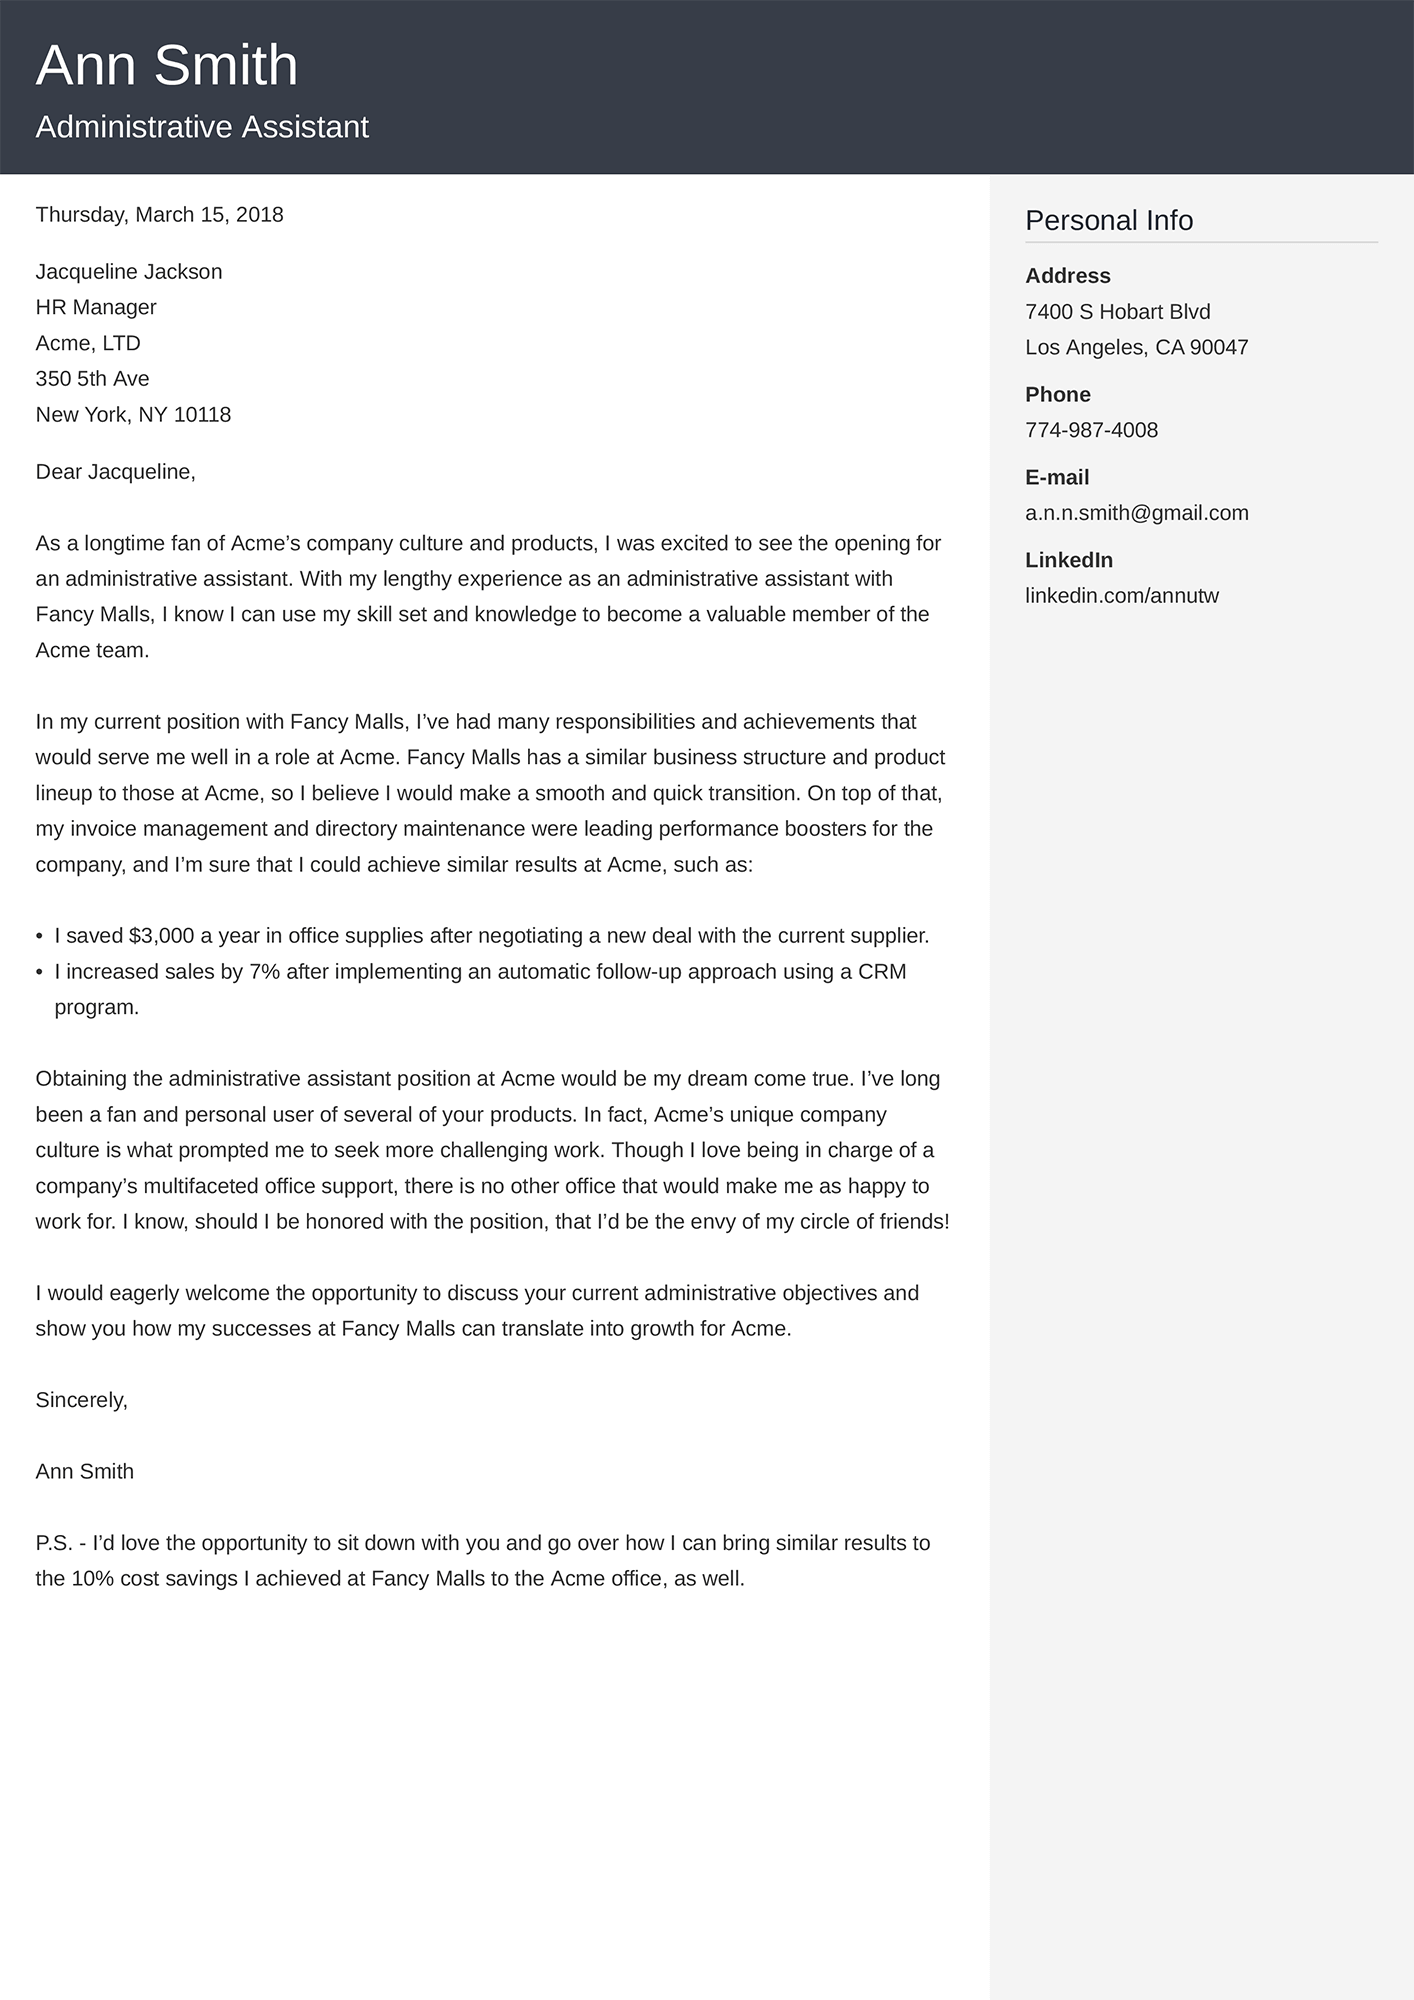 Volunteer Cover Letter No Experience from cdn-images.zety.com